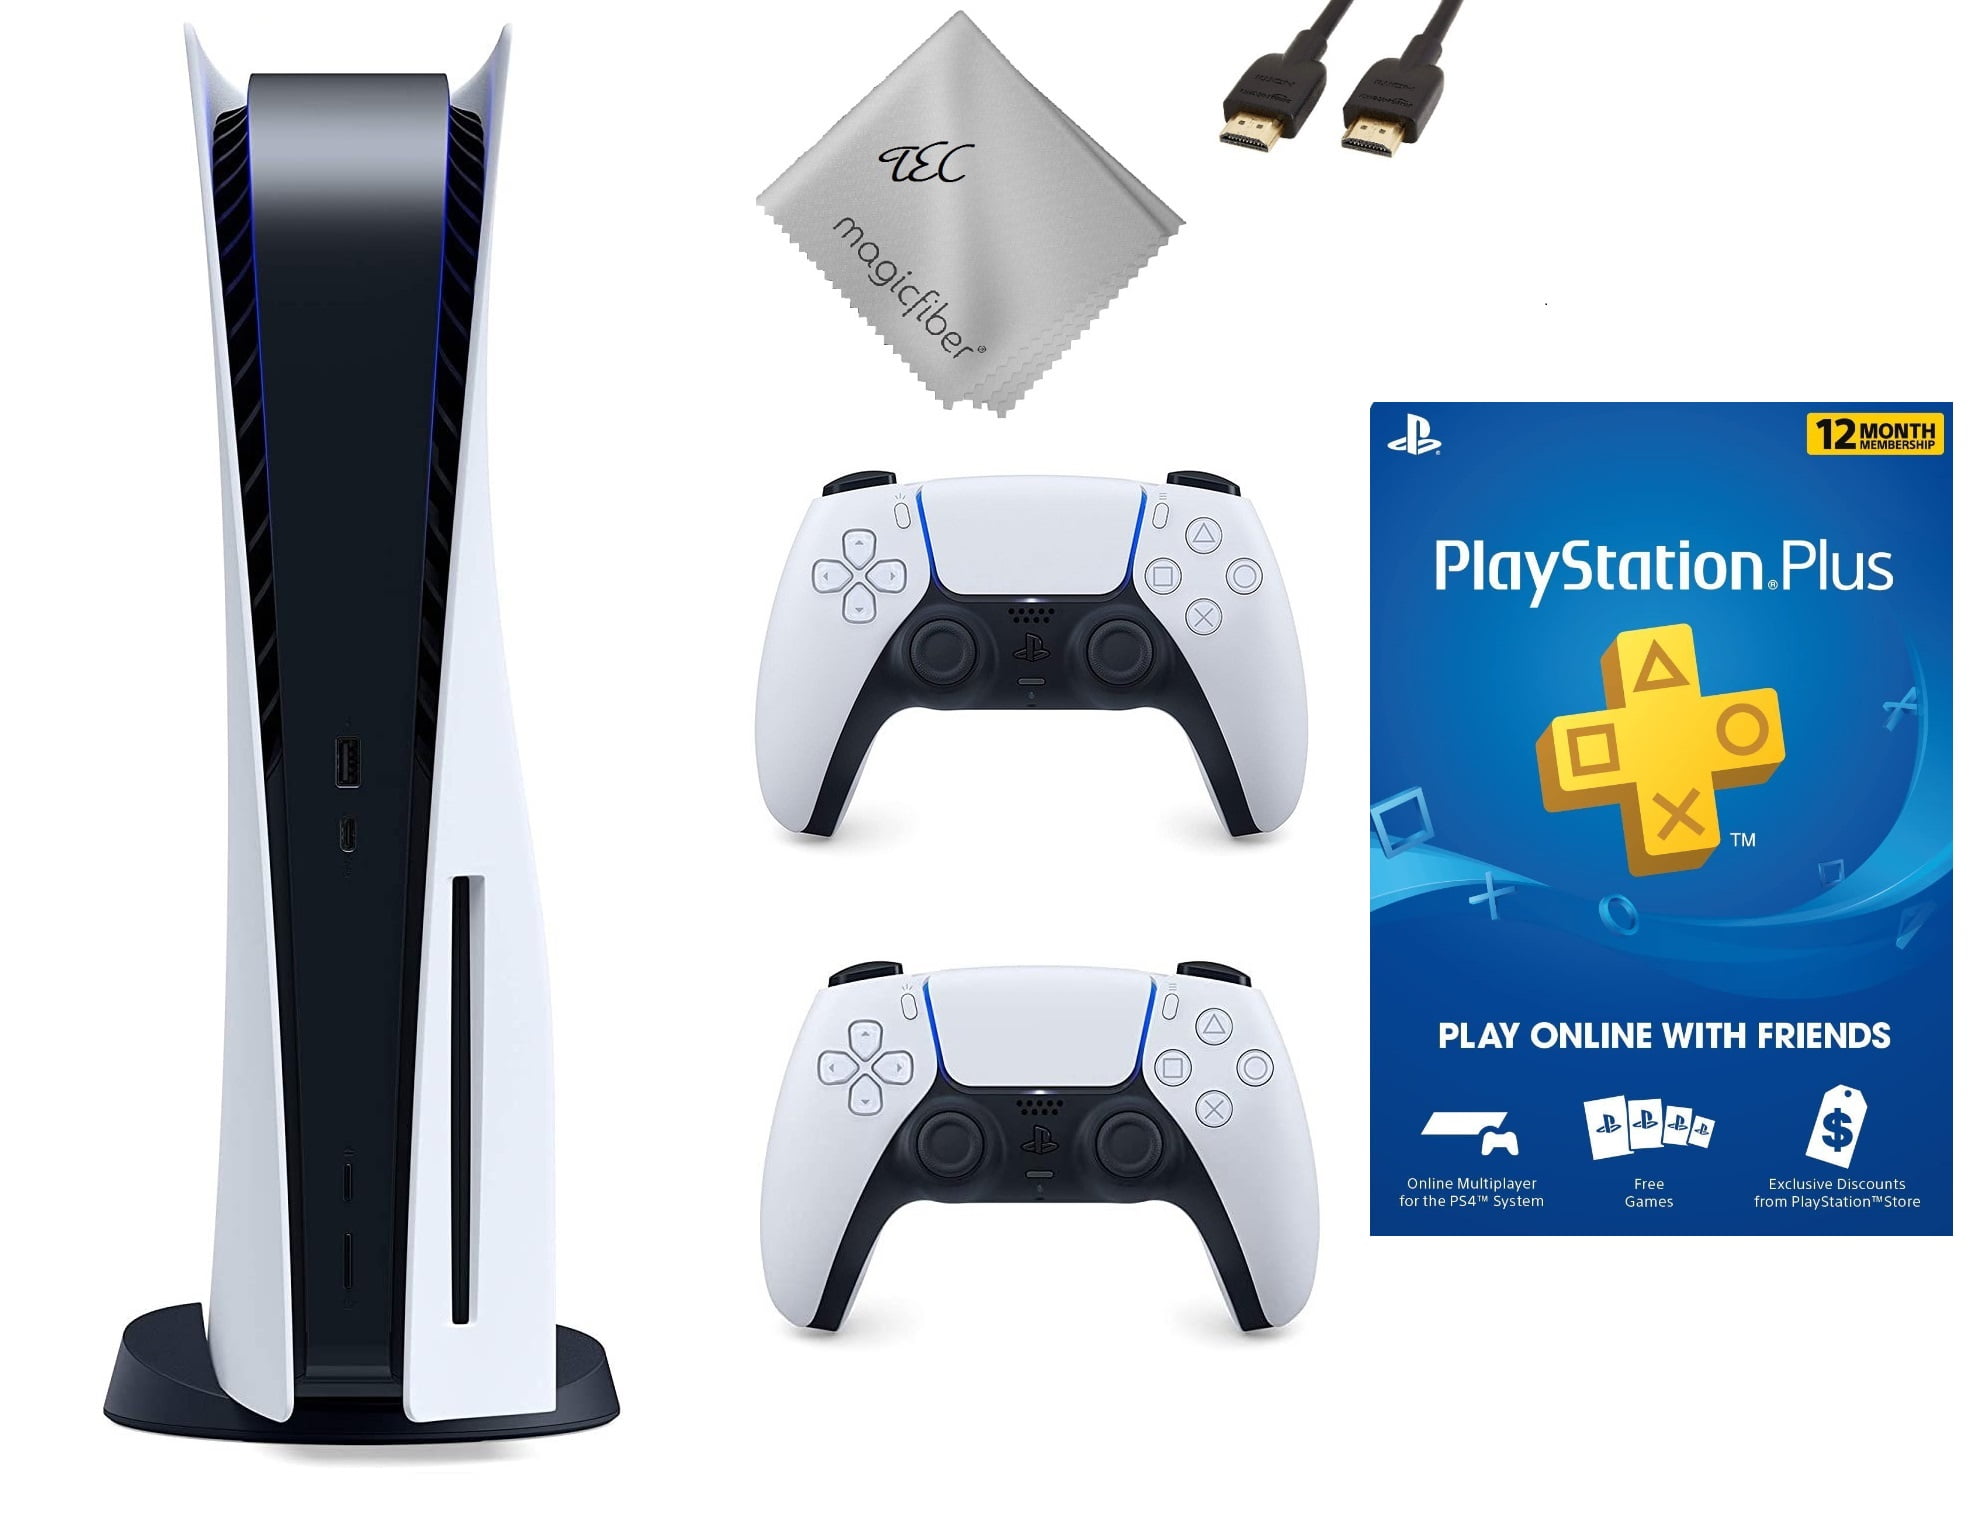 TEC Sony PlayStation_PS5 Gaming Console Disc Drive Version with One Extra Controller Bundle